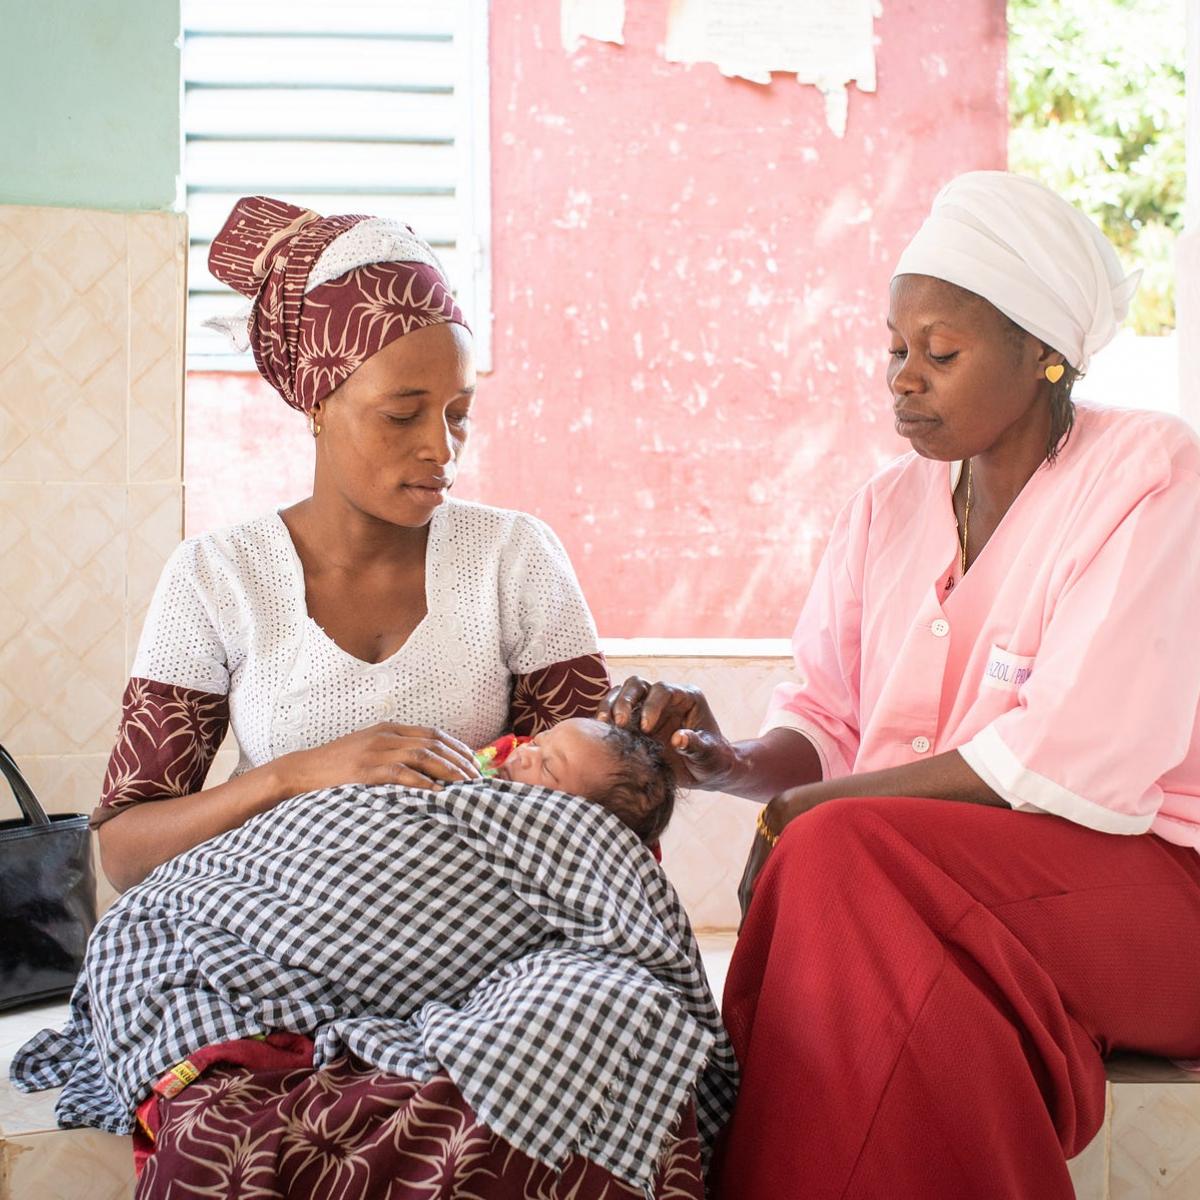 Djiba Balde sits with her child, Aissatou Balde, and the matron Penda Balde, after a consultation in the health center of Sarre Bilaly in the Kolda region, Senegal.